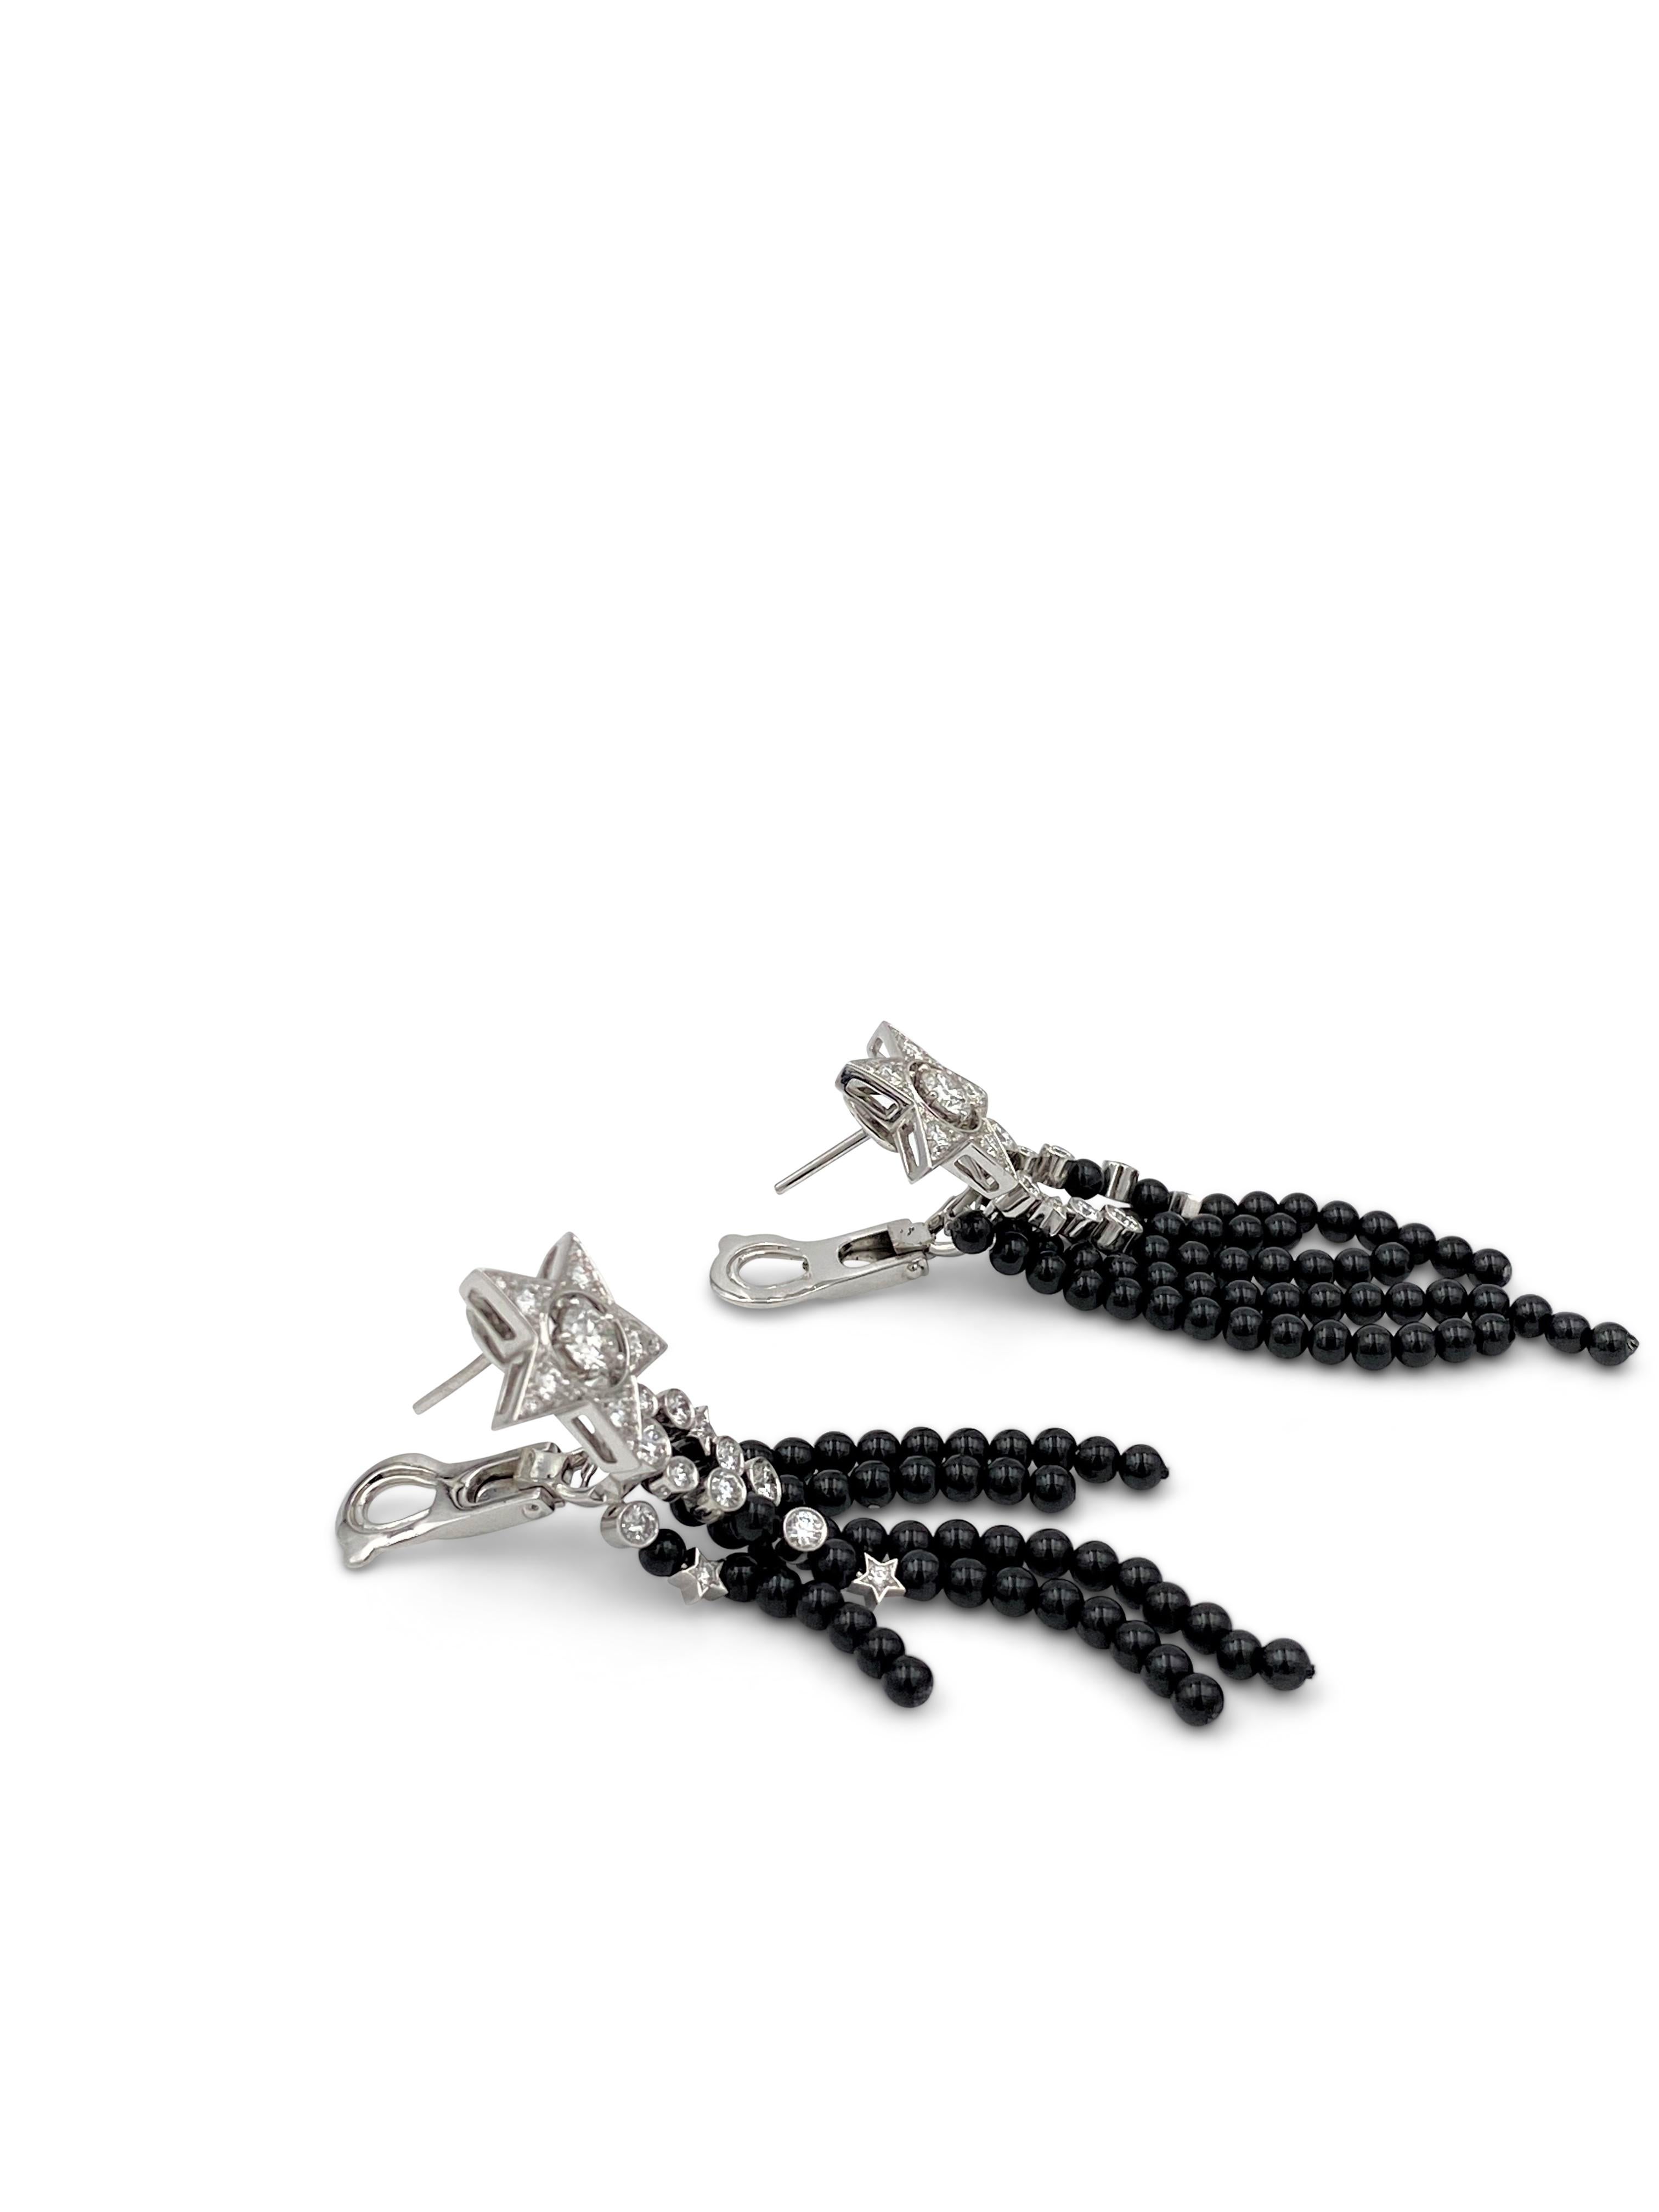 A show-stopping pair of Chanel earrings from the Comète collection. Crafted in 18 karat white gold, the earrings feature a star set with an estimated 1.20 carats of high quality (E-F, VS) round brilliant cut diamonds with a trail of black spinel